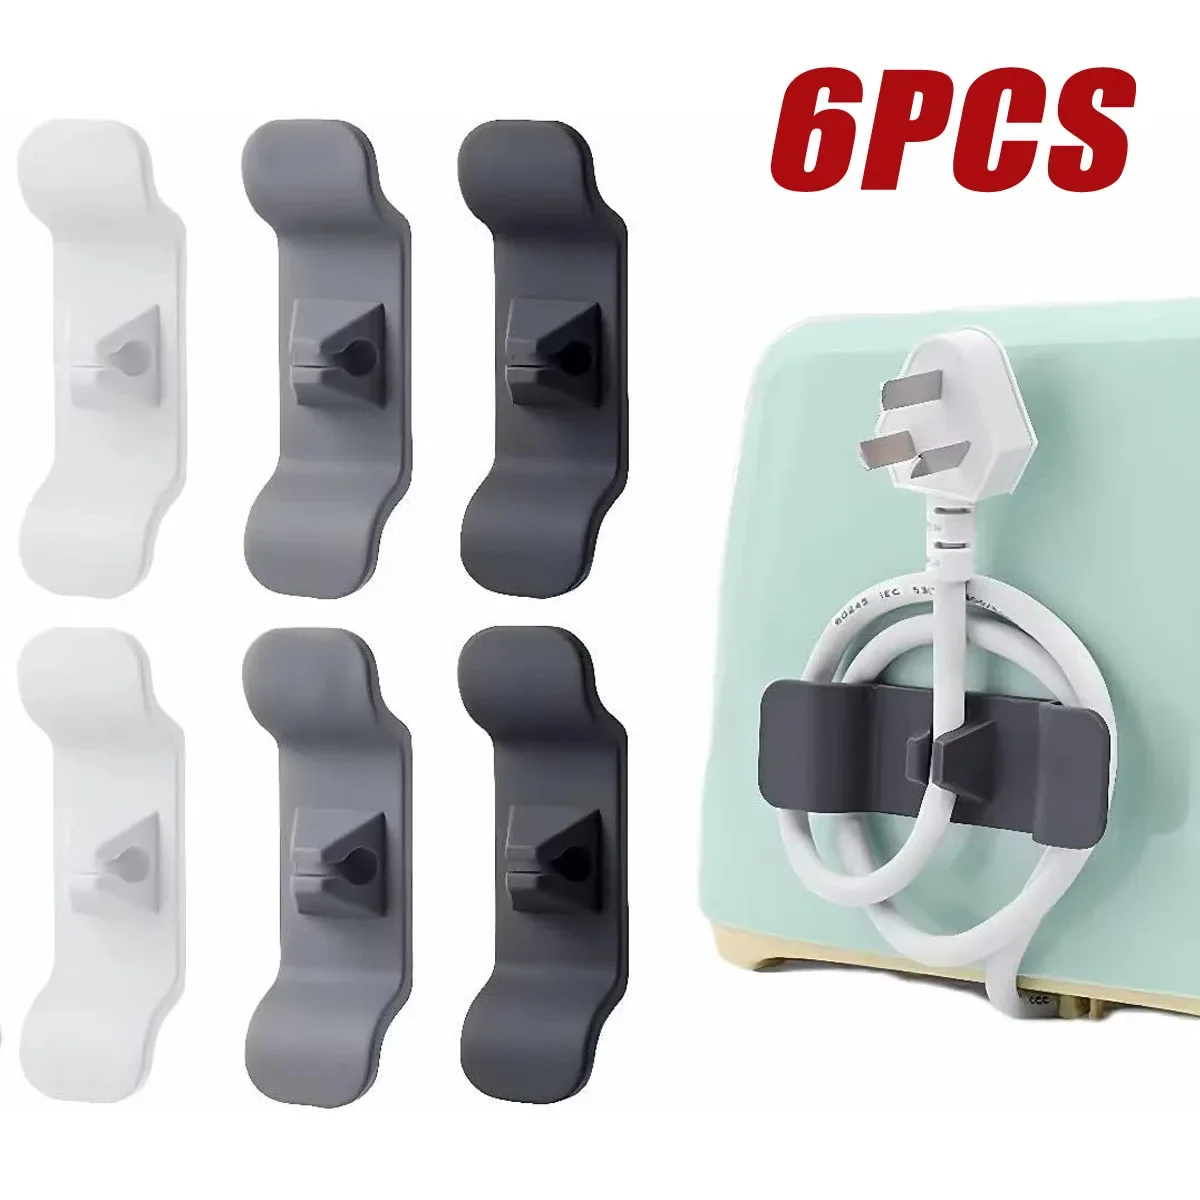 

Cable Winding Appliances Wrapper Household Winder Appliance Kitchen Wire Cable Wire 6pcs Cord Hooks Organizer Protection Clip